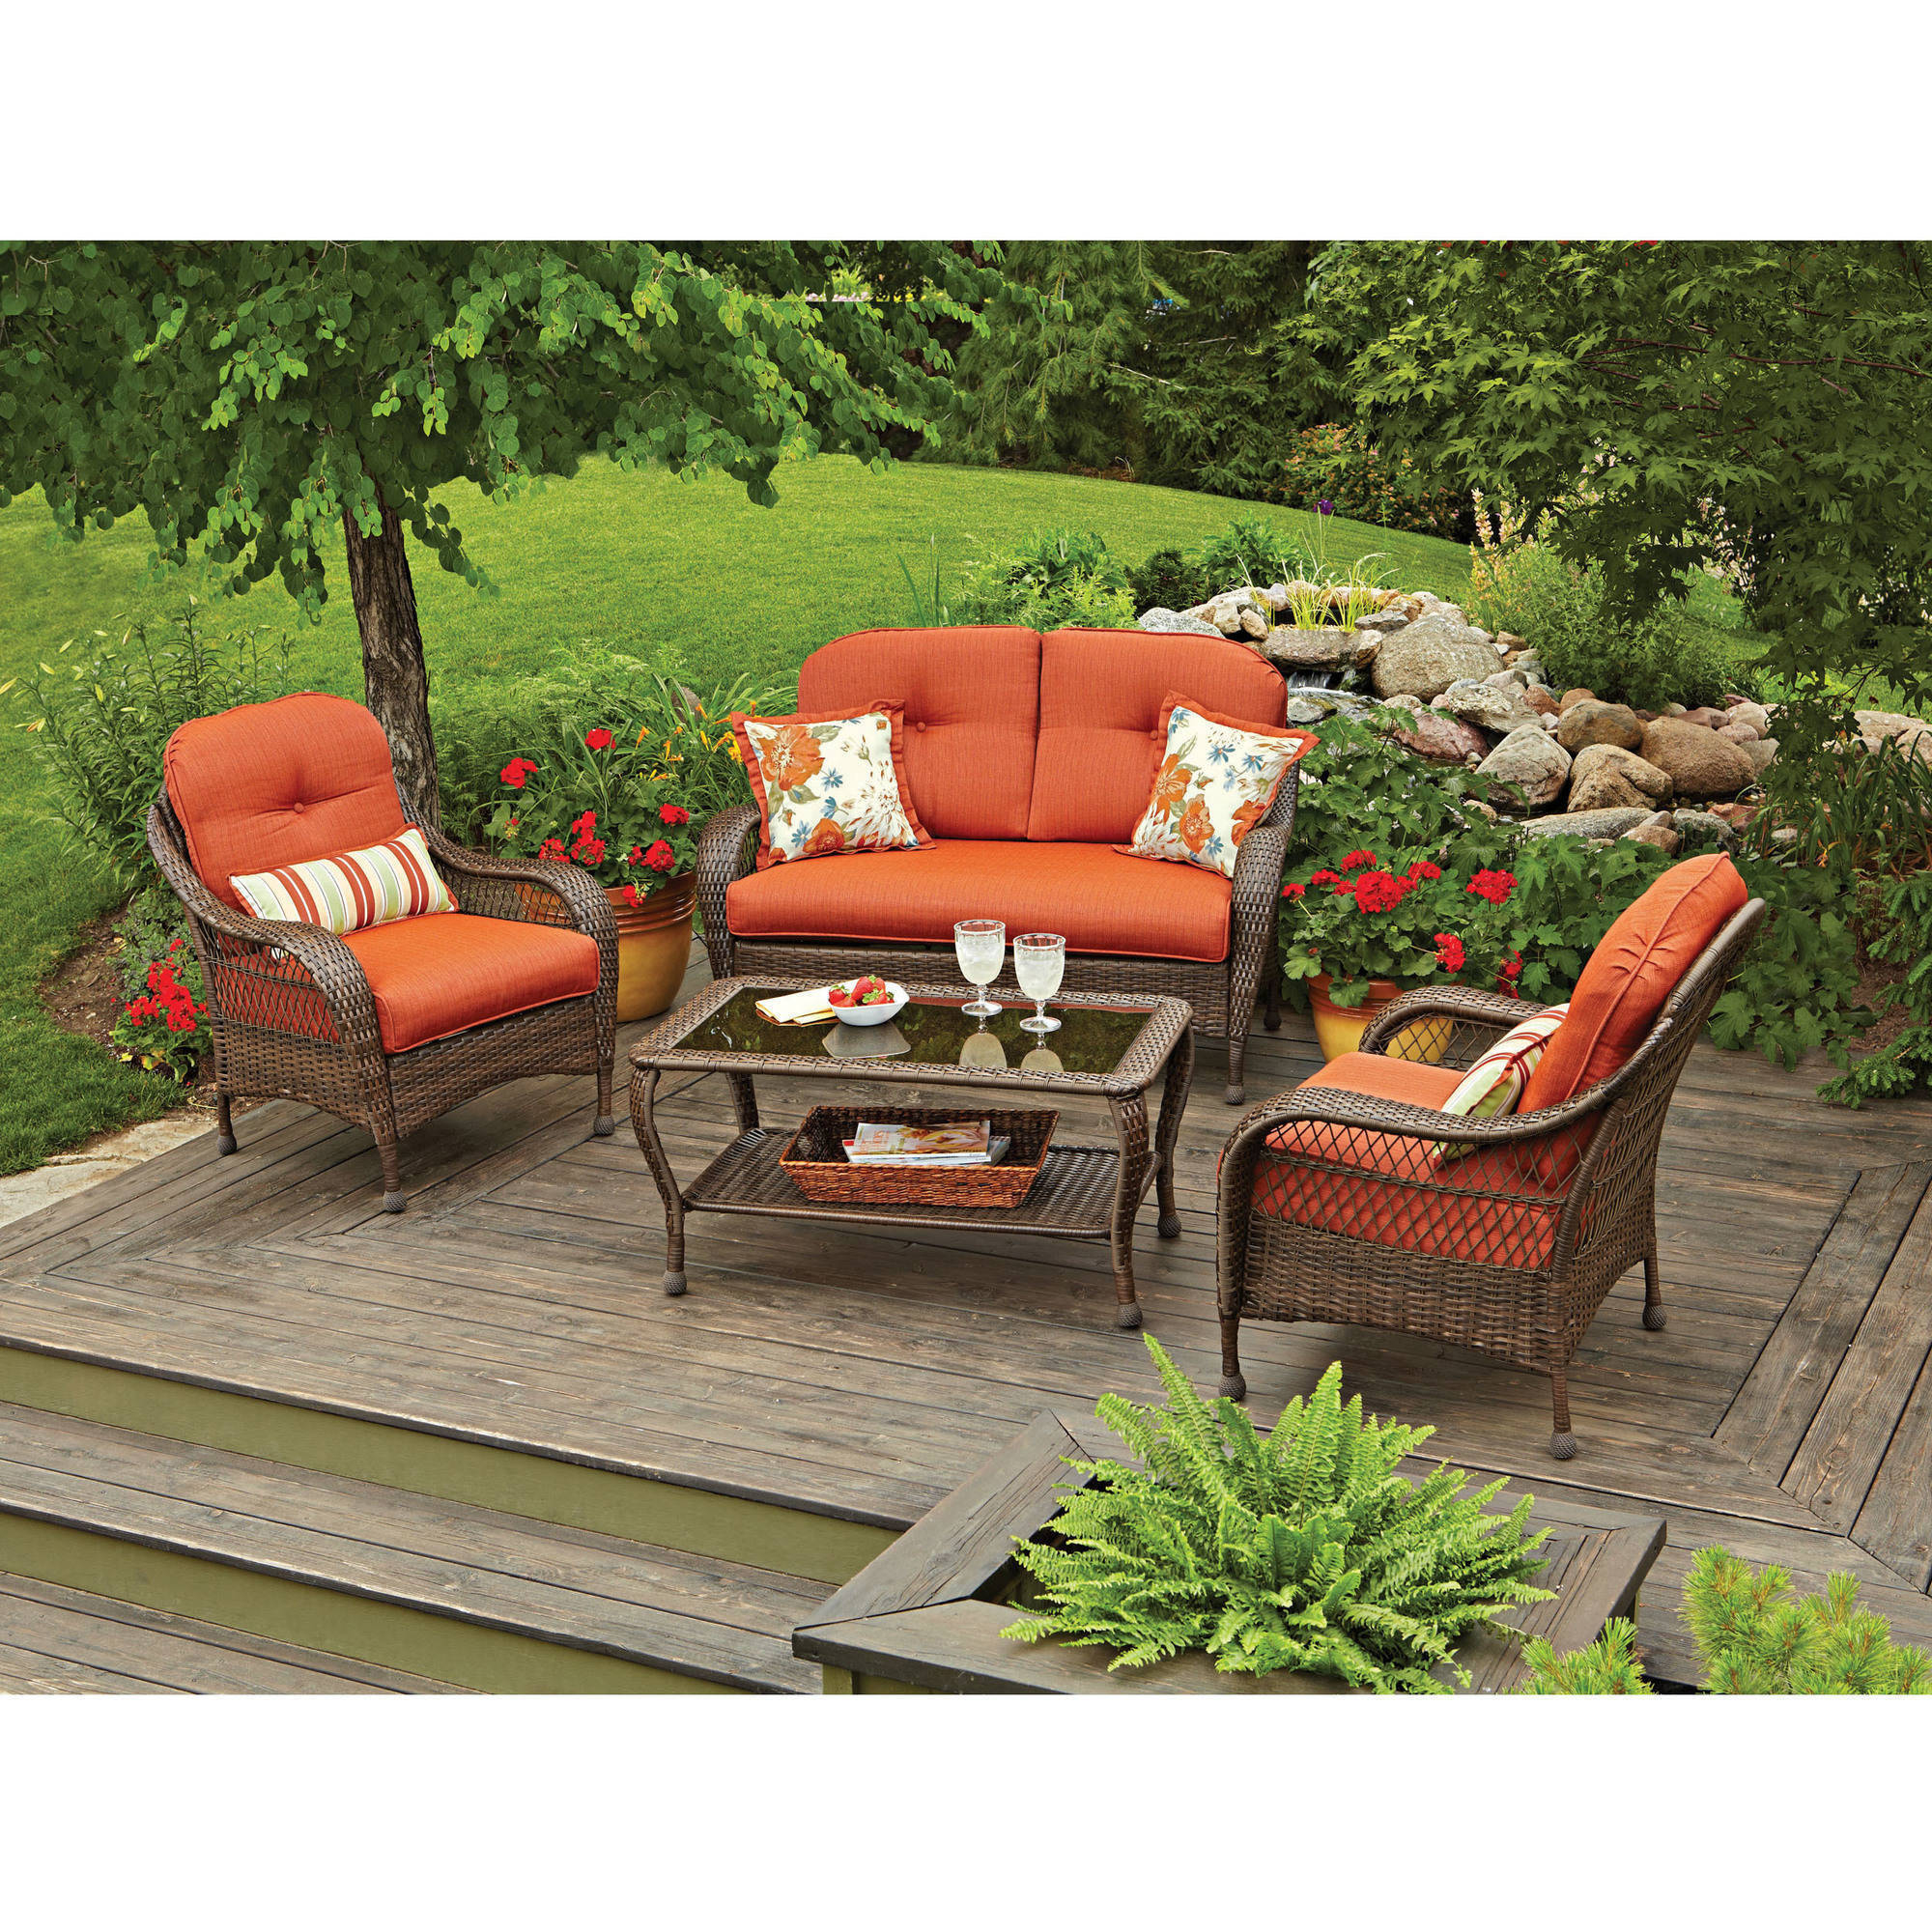 Better Homes Gardens Azalea Ridge Outdoor Conversation Set With Orange Cushions Walmart intended for proportions 2000 X 2000